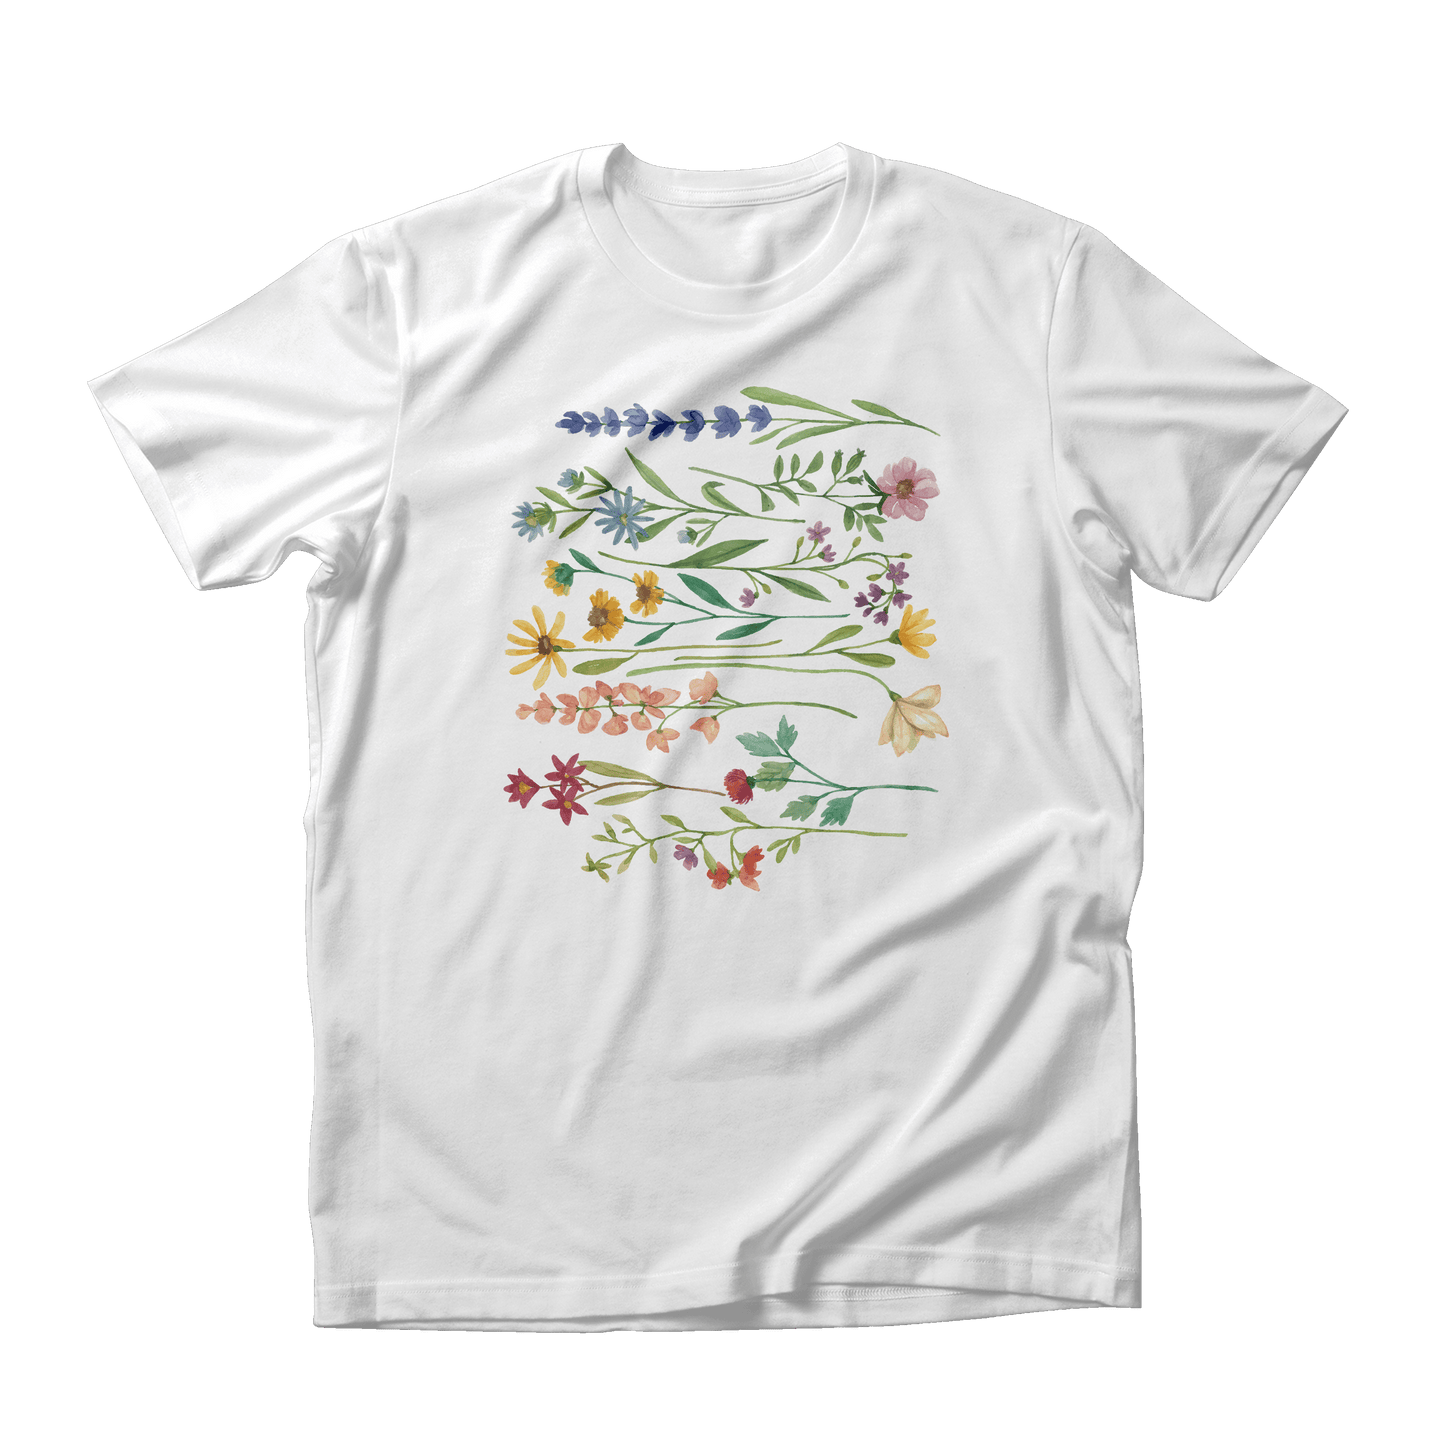 Boho Wildflowers Shirt - Perfect Gift for Her | Aesthetic Floral Top